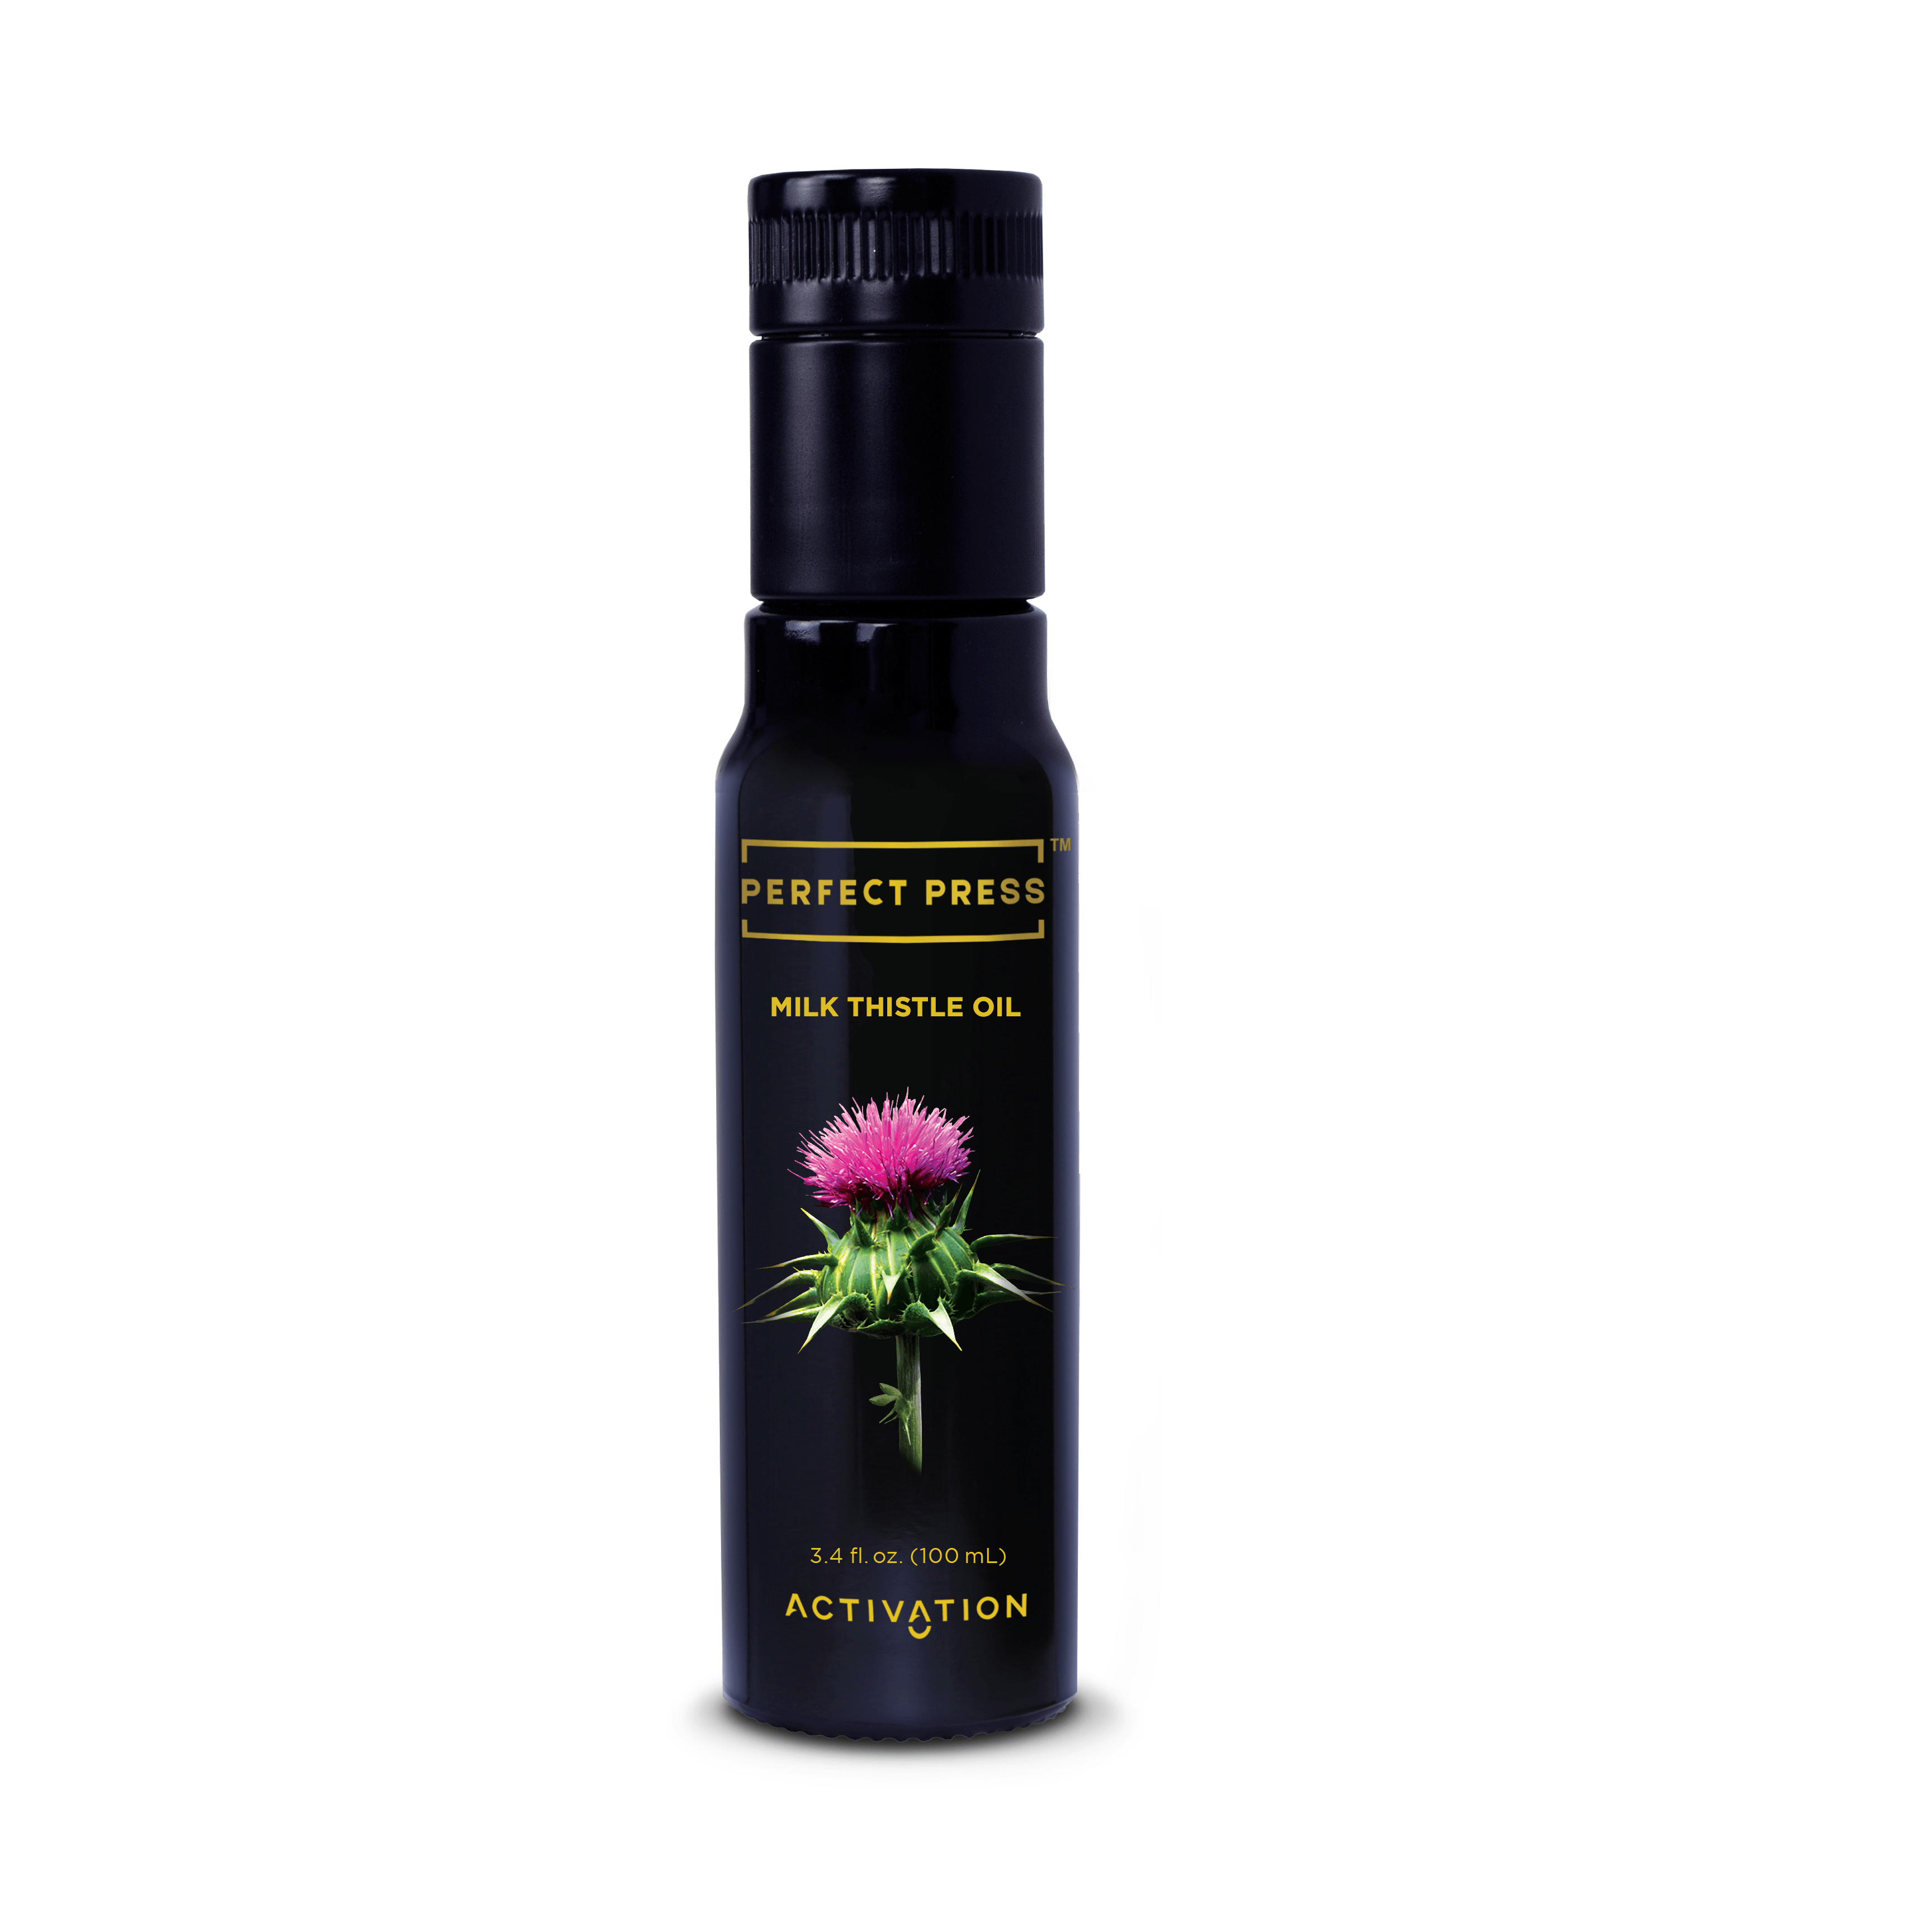 Activation Products - Perfect Press - Milk Thistle Oil, 100ml